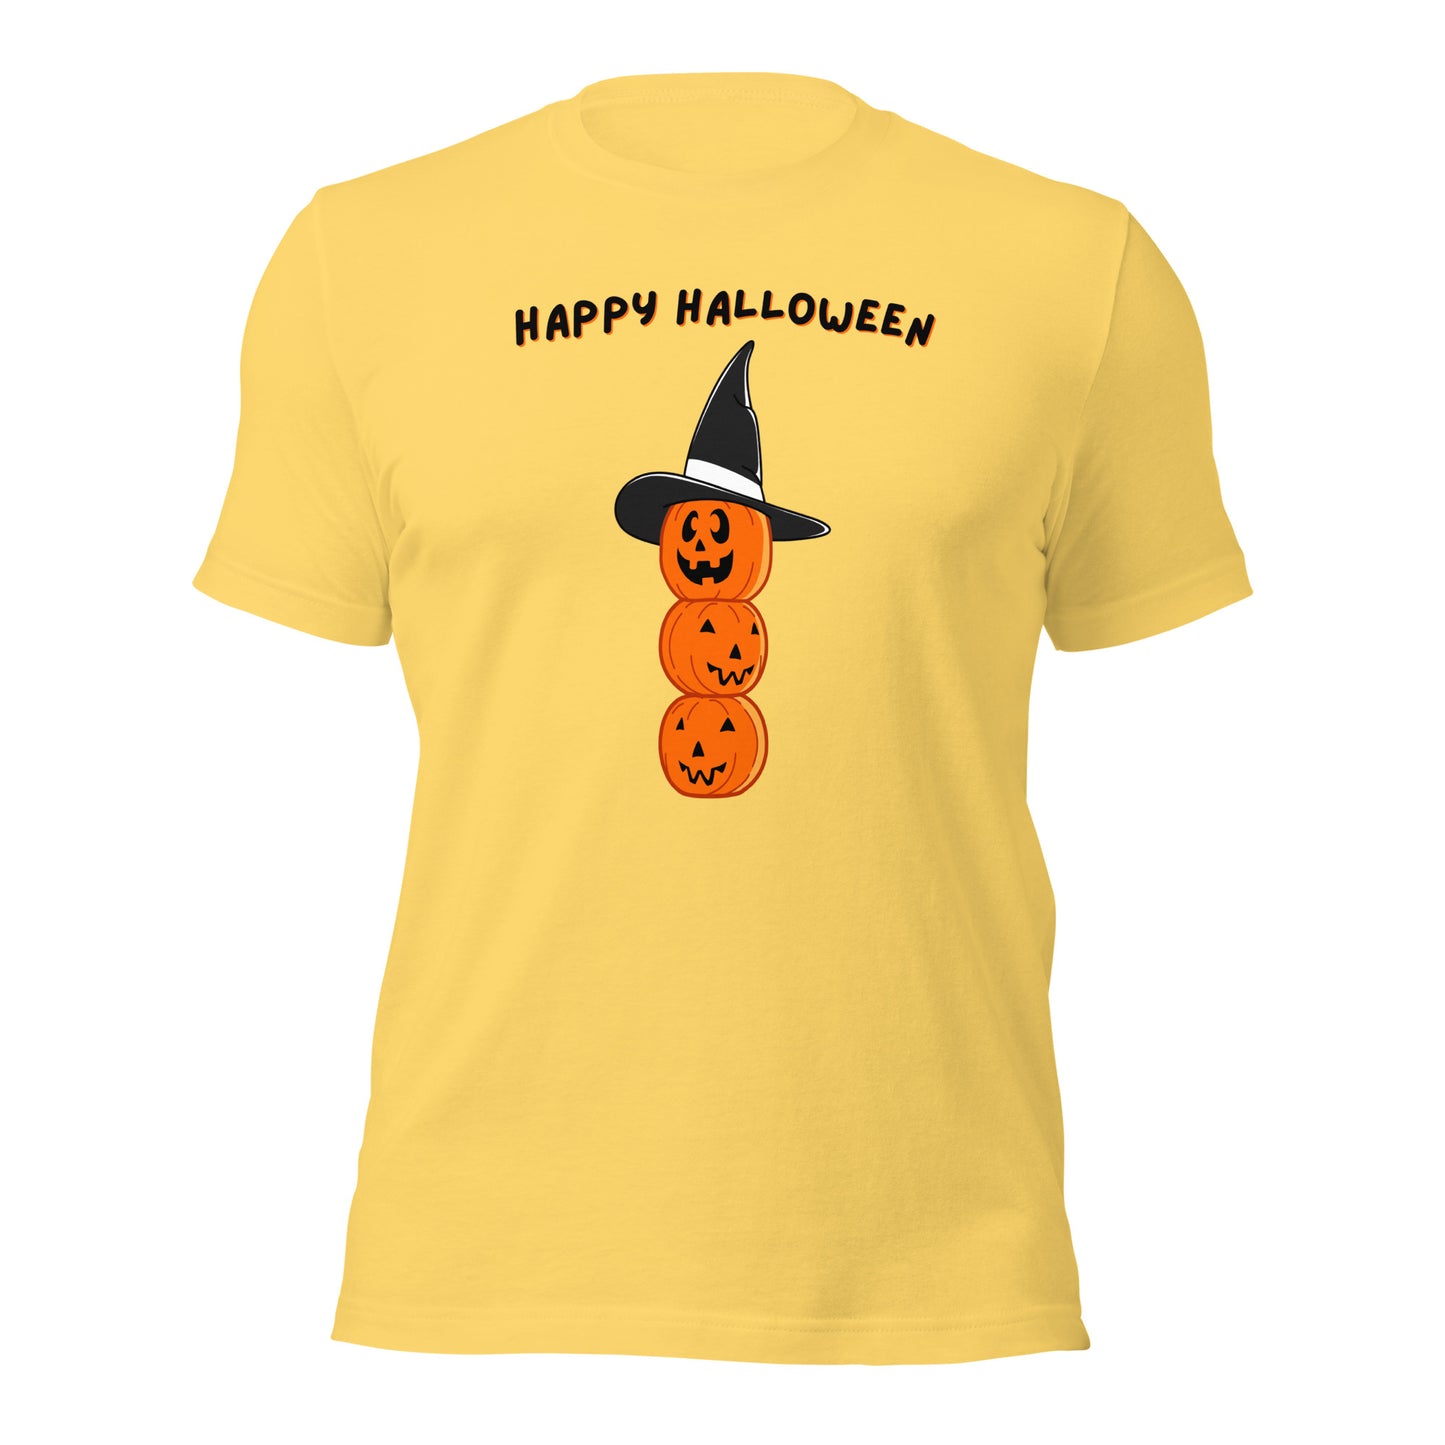 "Happy Halloween" T-Shirt - Weave Got Gifts - Unique Gifts You Won’t Find Anywhere Else!